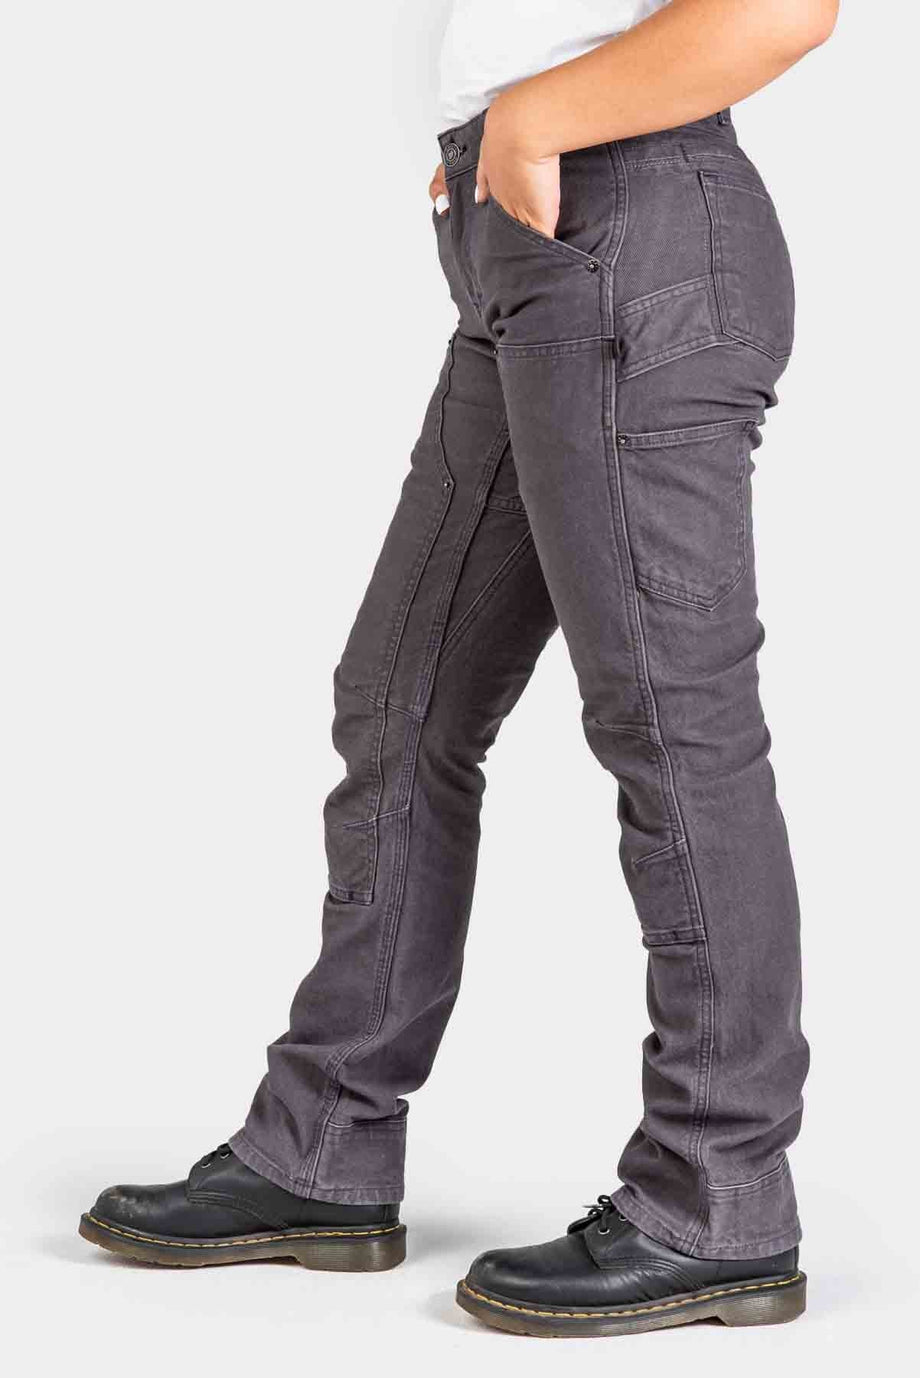 New Women's Stretch Woven Tapered Cargo Pants - All in Motion™ Black M